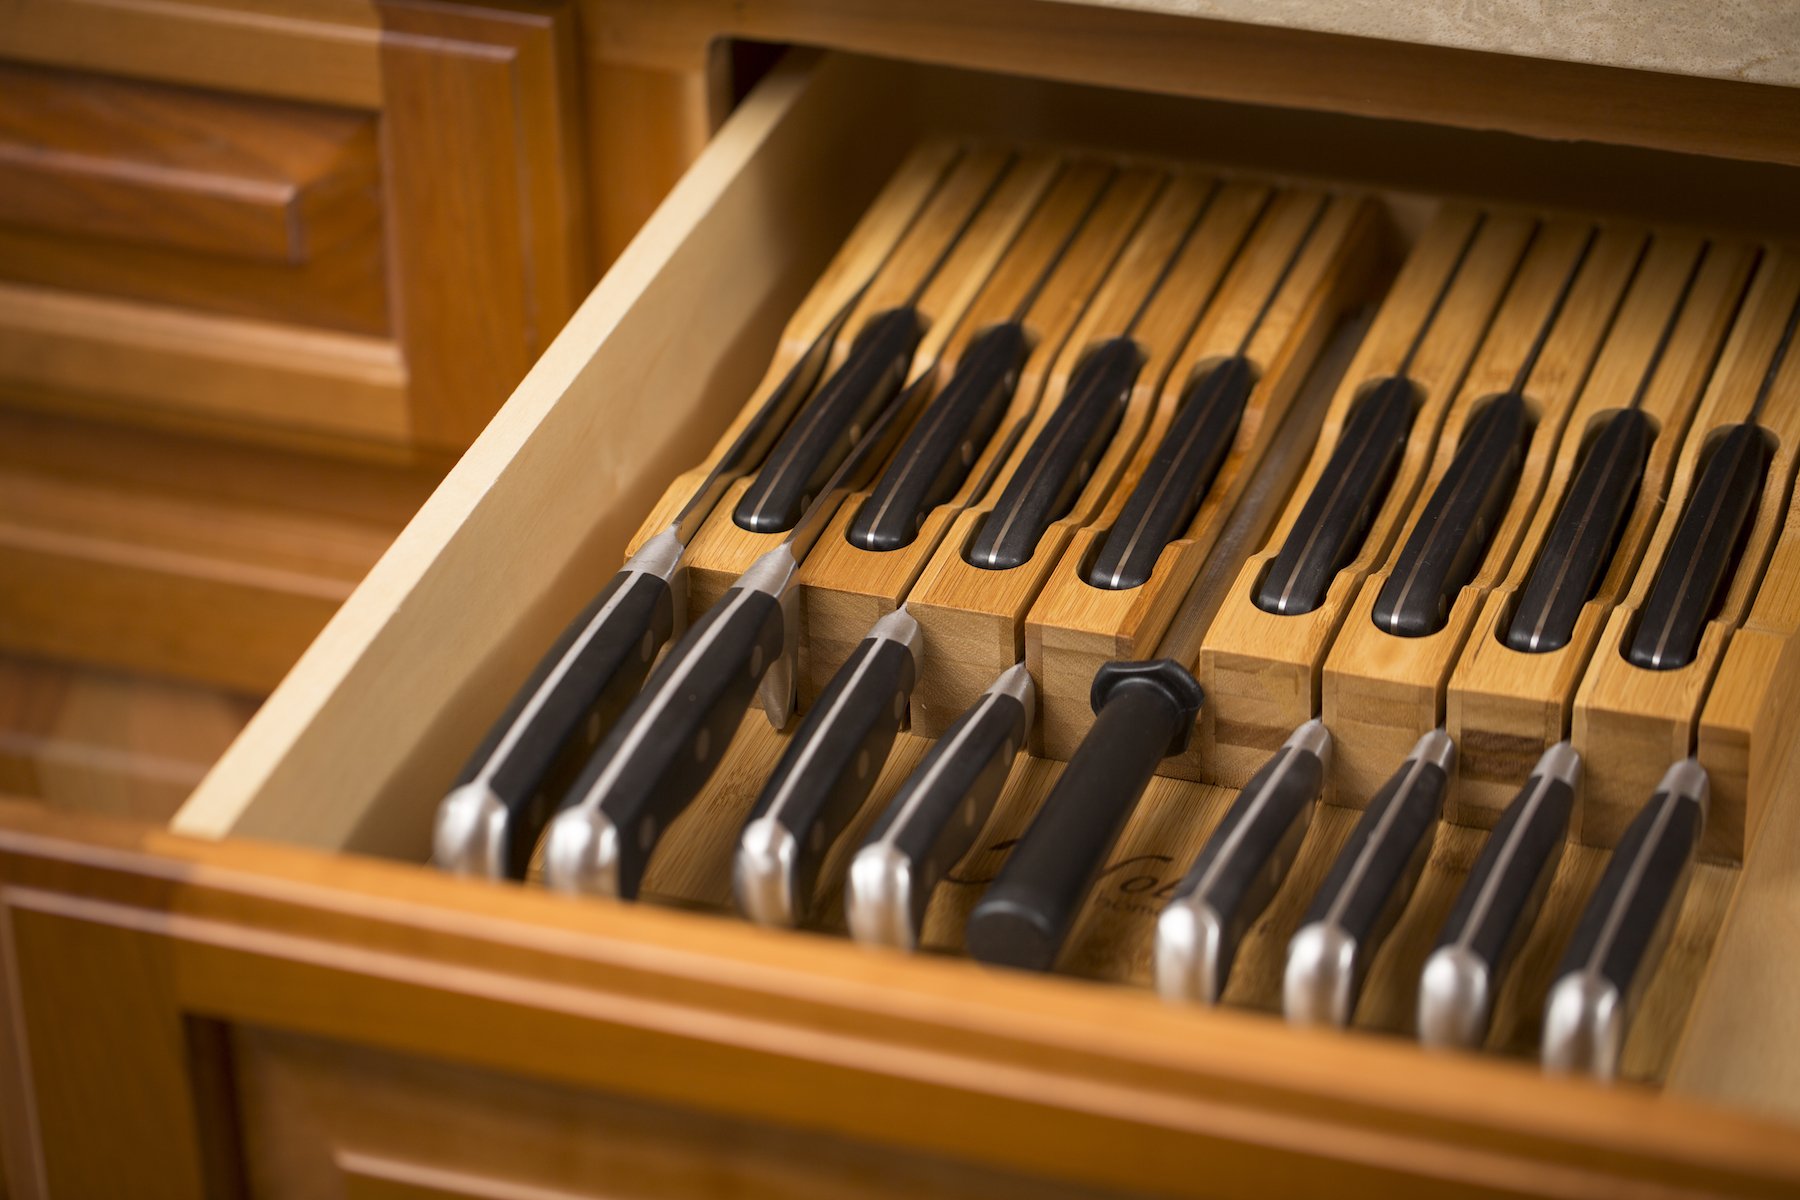 Knife block in a kitchen drawer